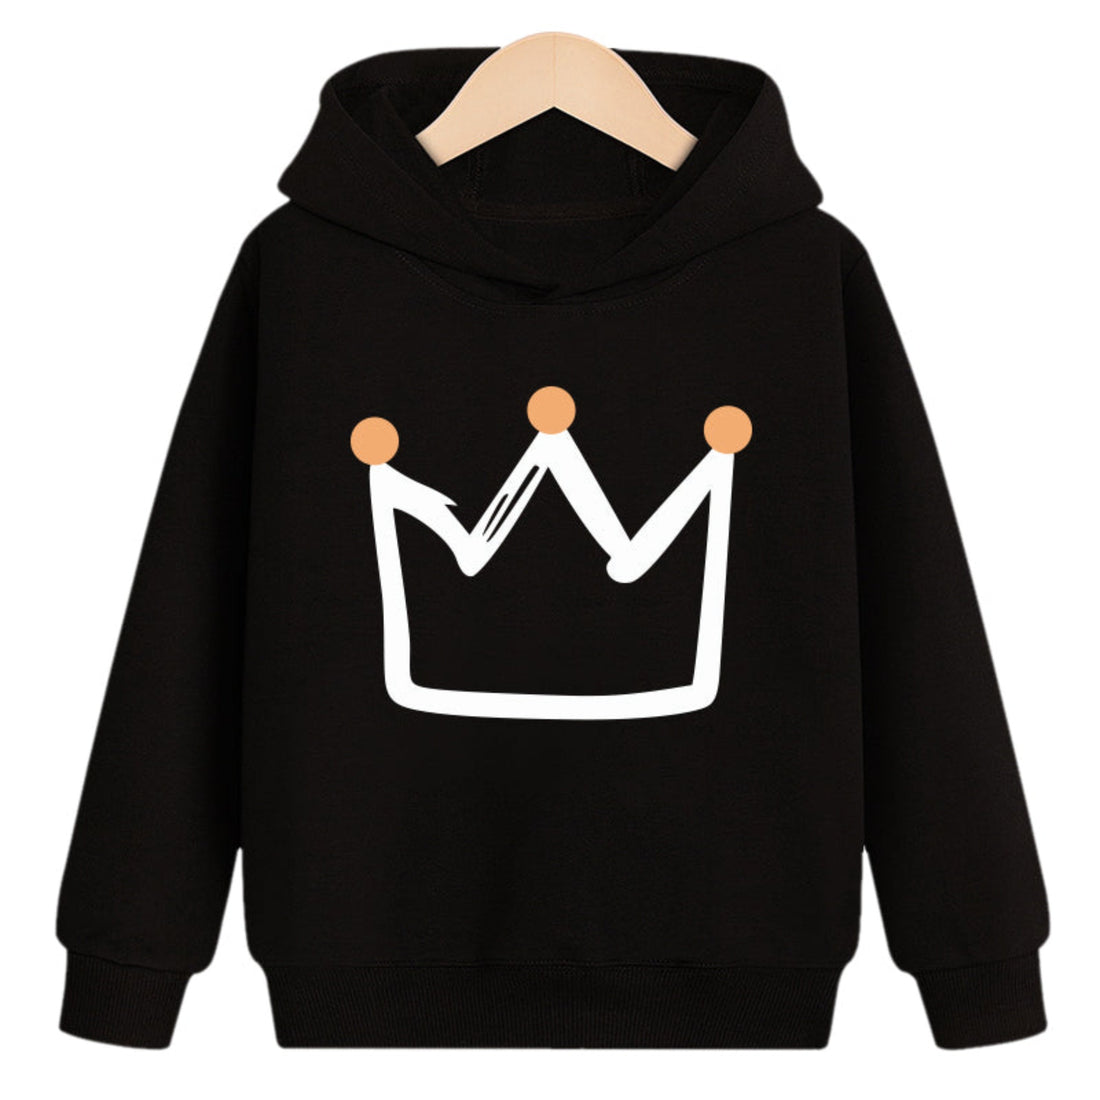 Close-up of a plush velvet sweatshirt for kids with a crown design on the hood.